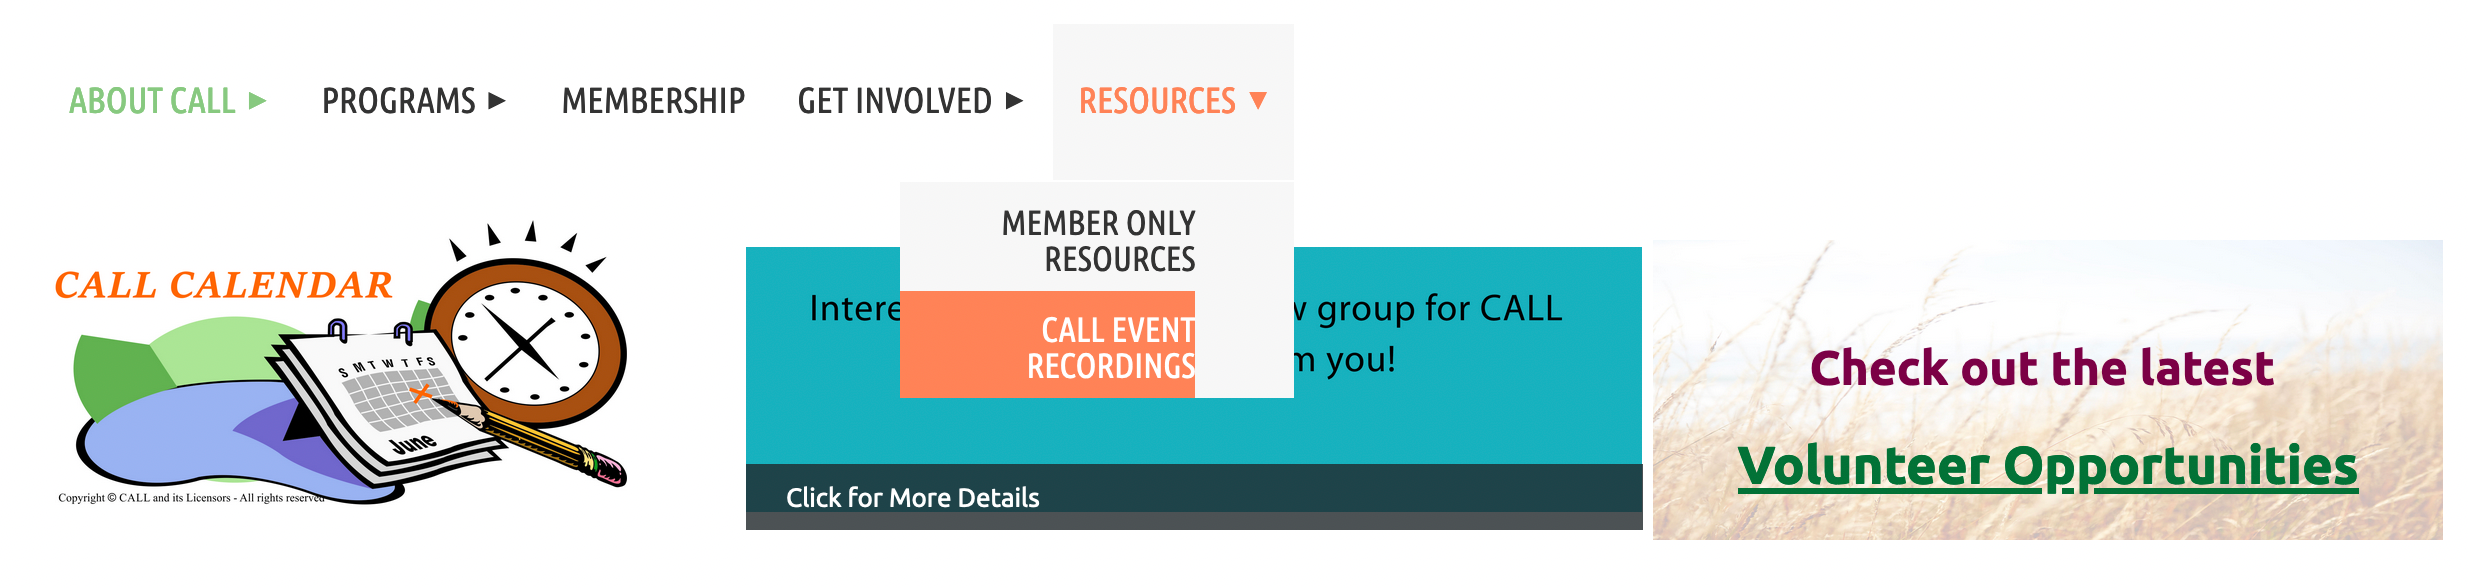 Screen shot showing Resources menu and CALL Event Recordings item